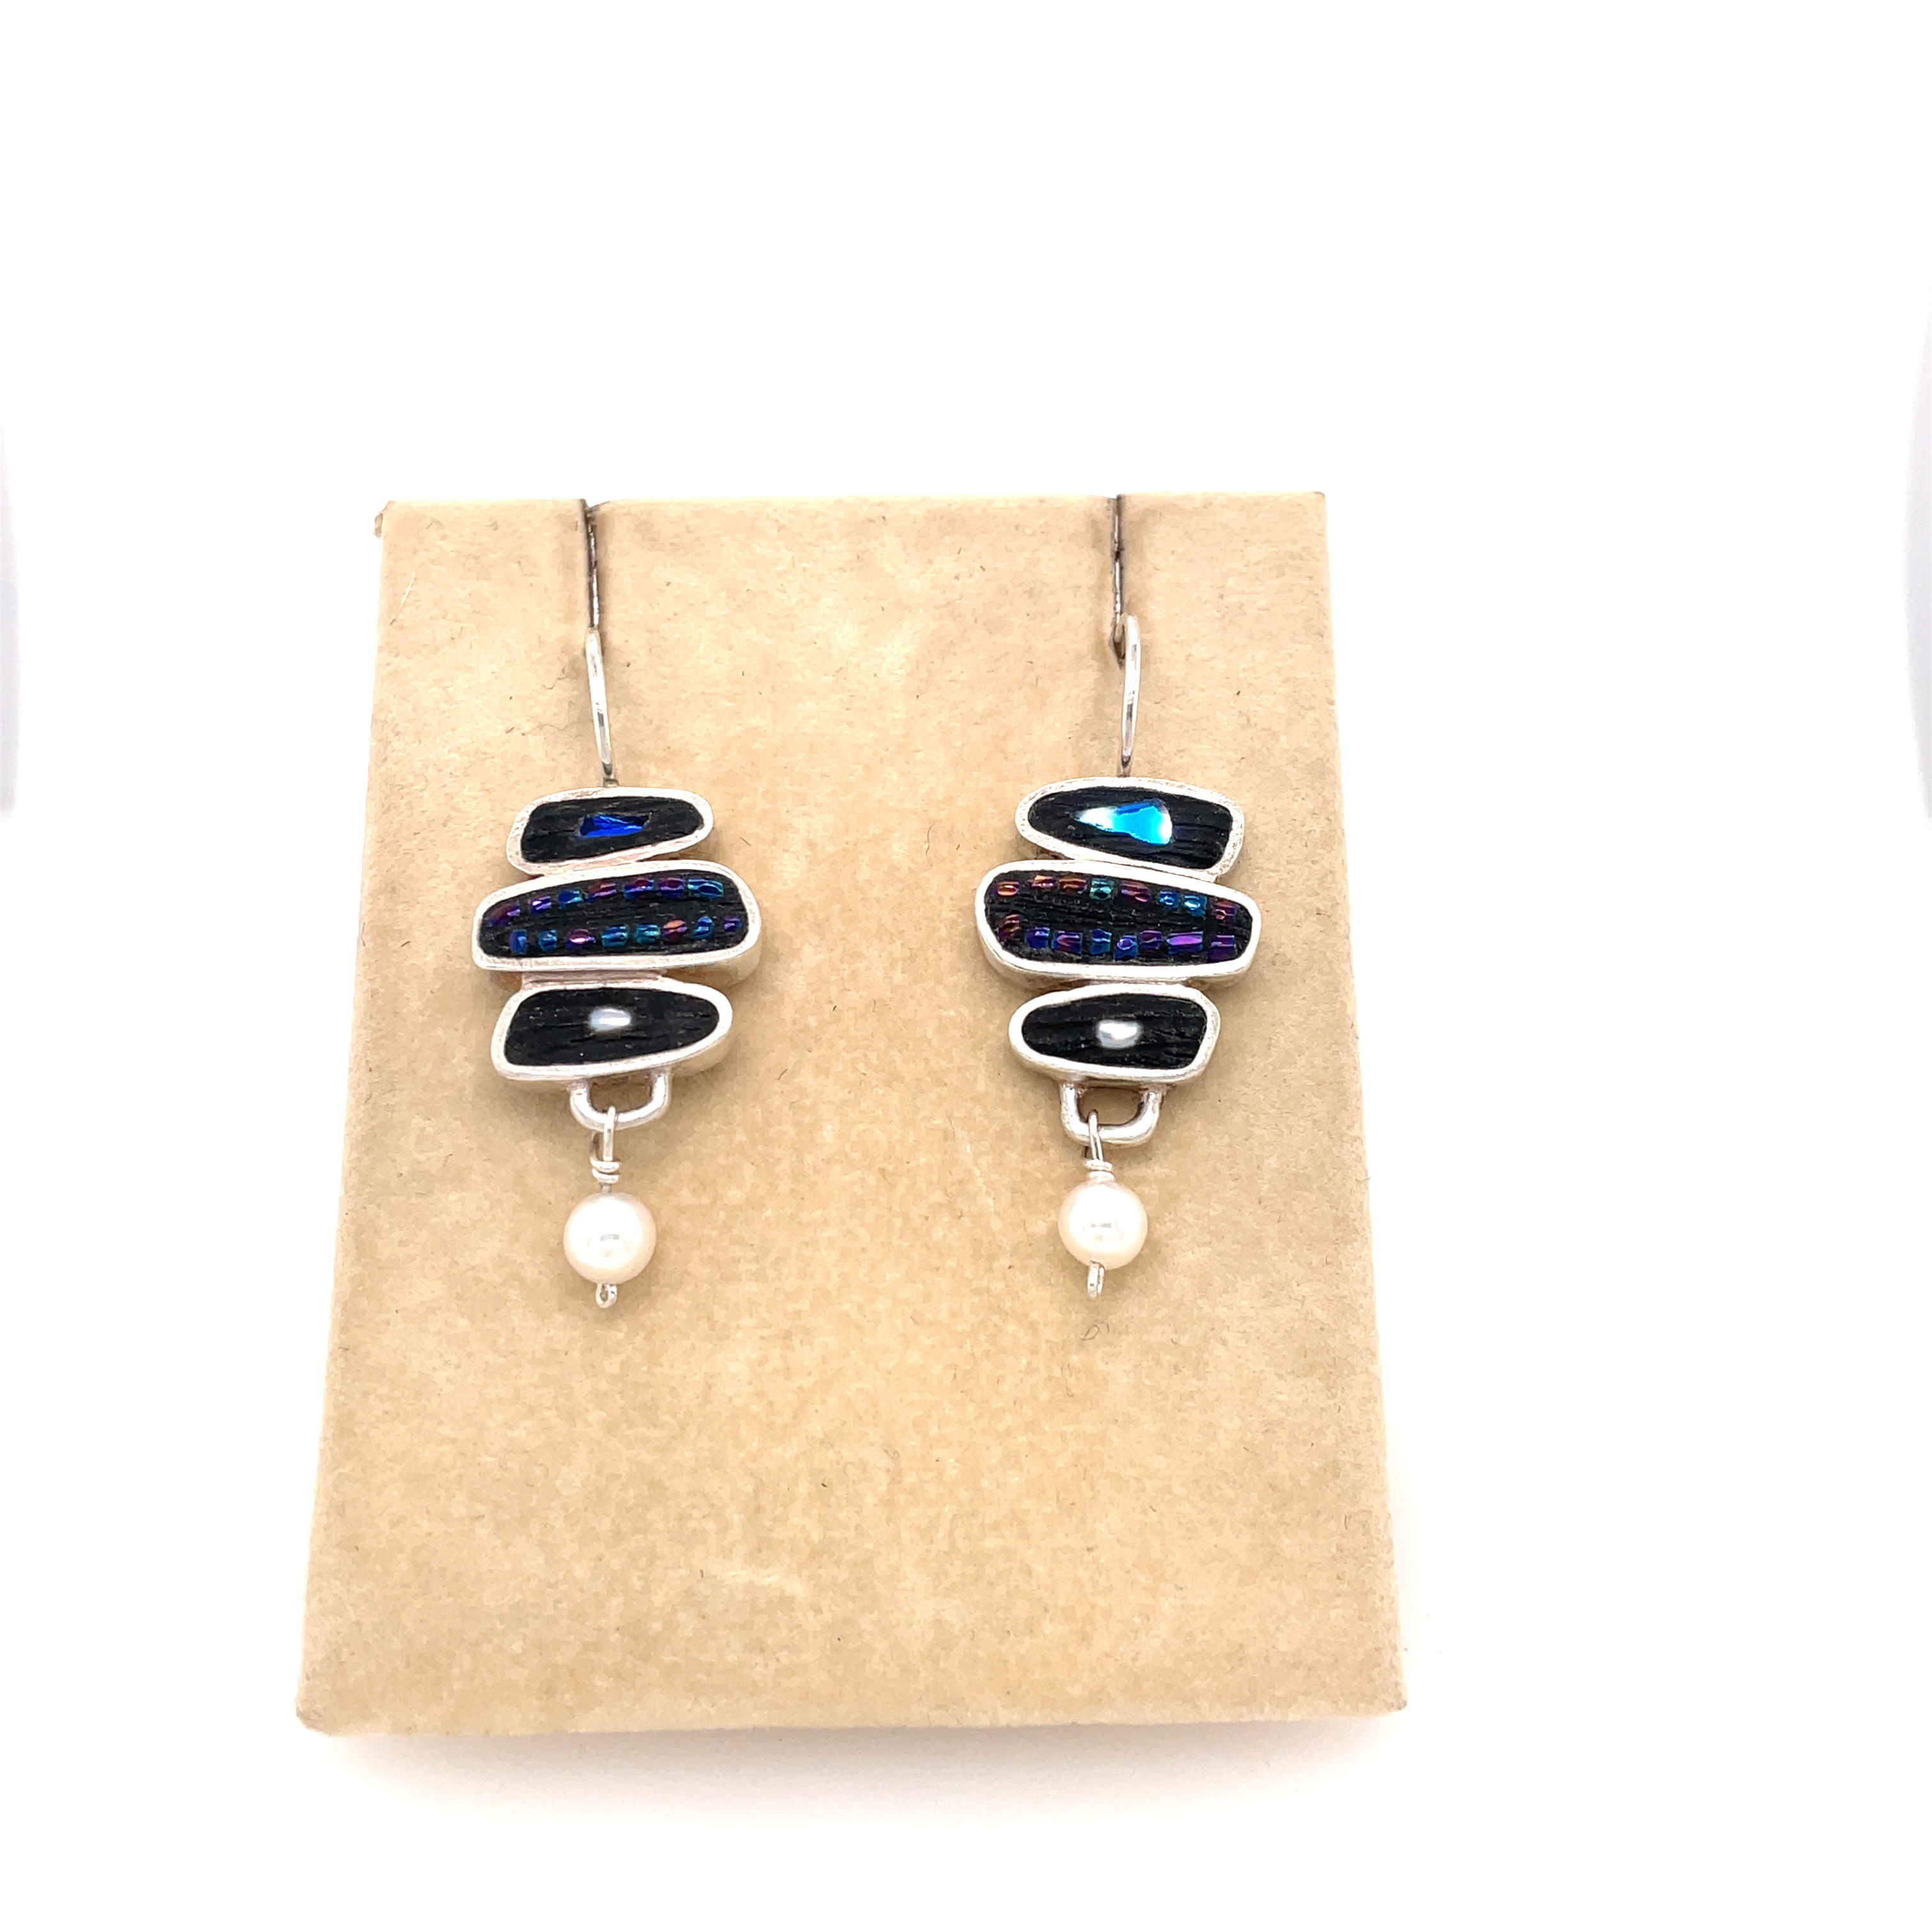 3 Black Rectangle Earrings with Pearl Drop